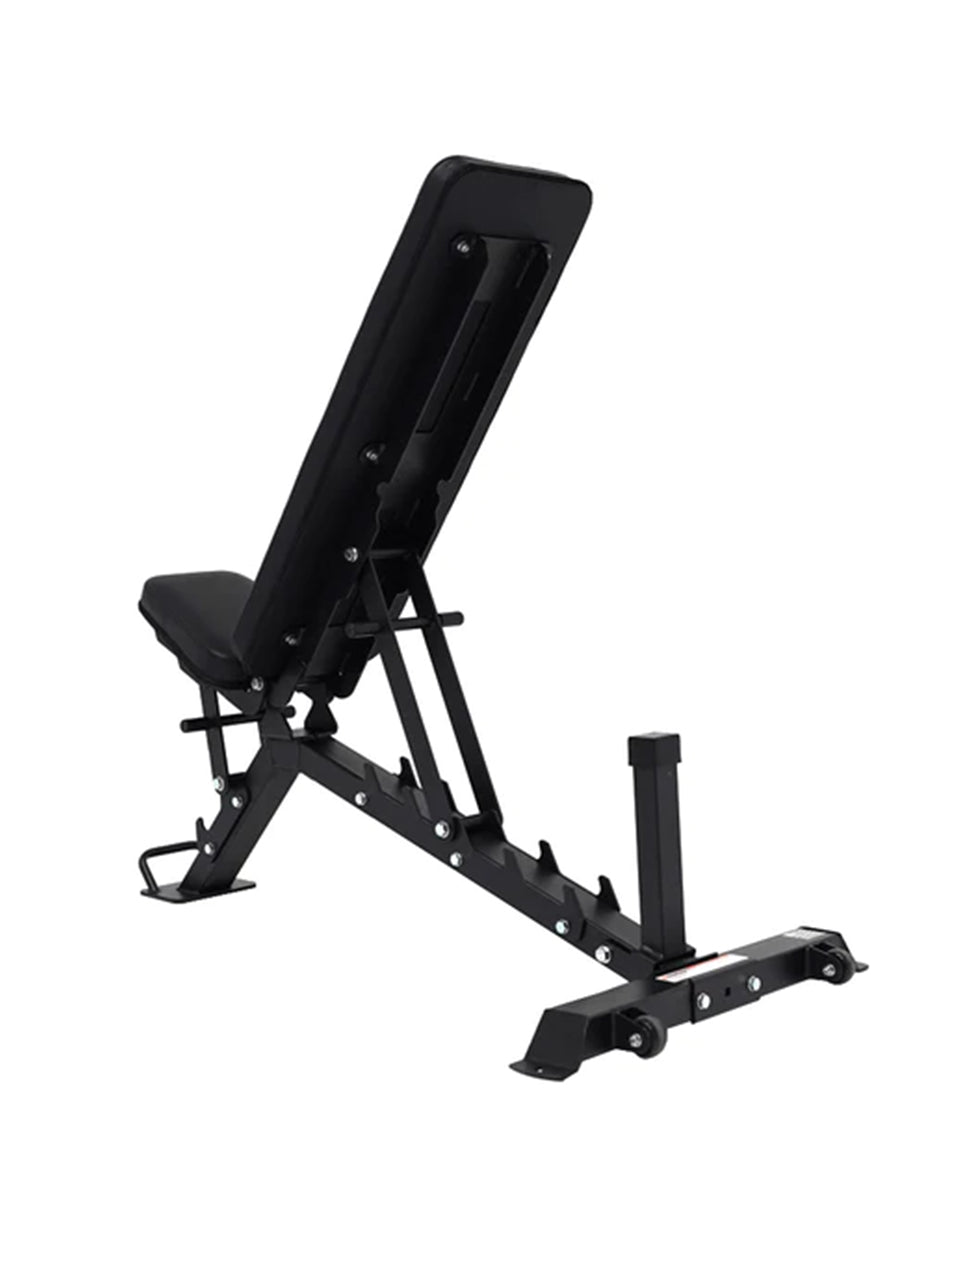 Force USA Commercial Flat / Incline / Decline Bench